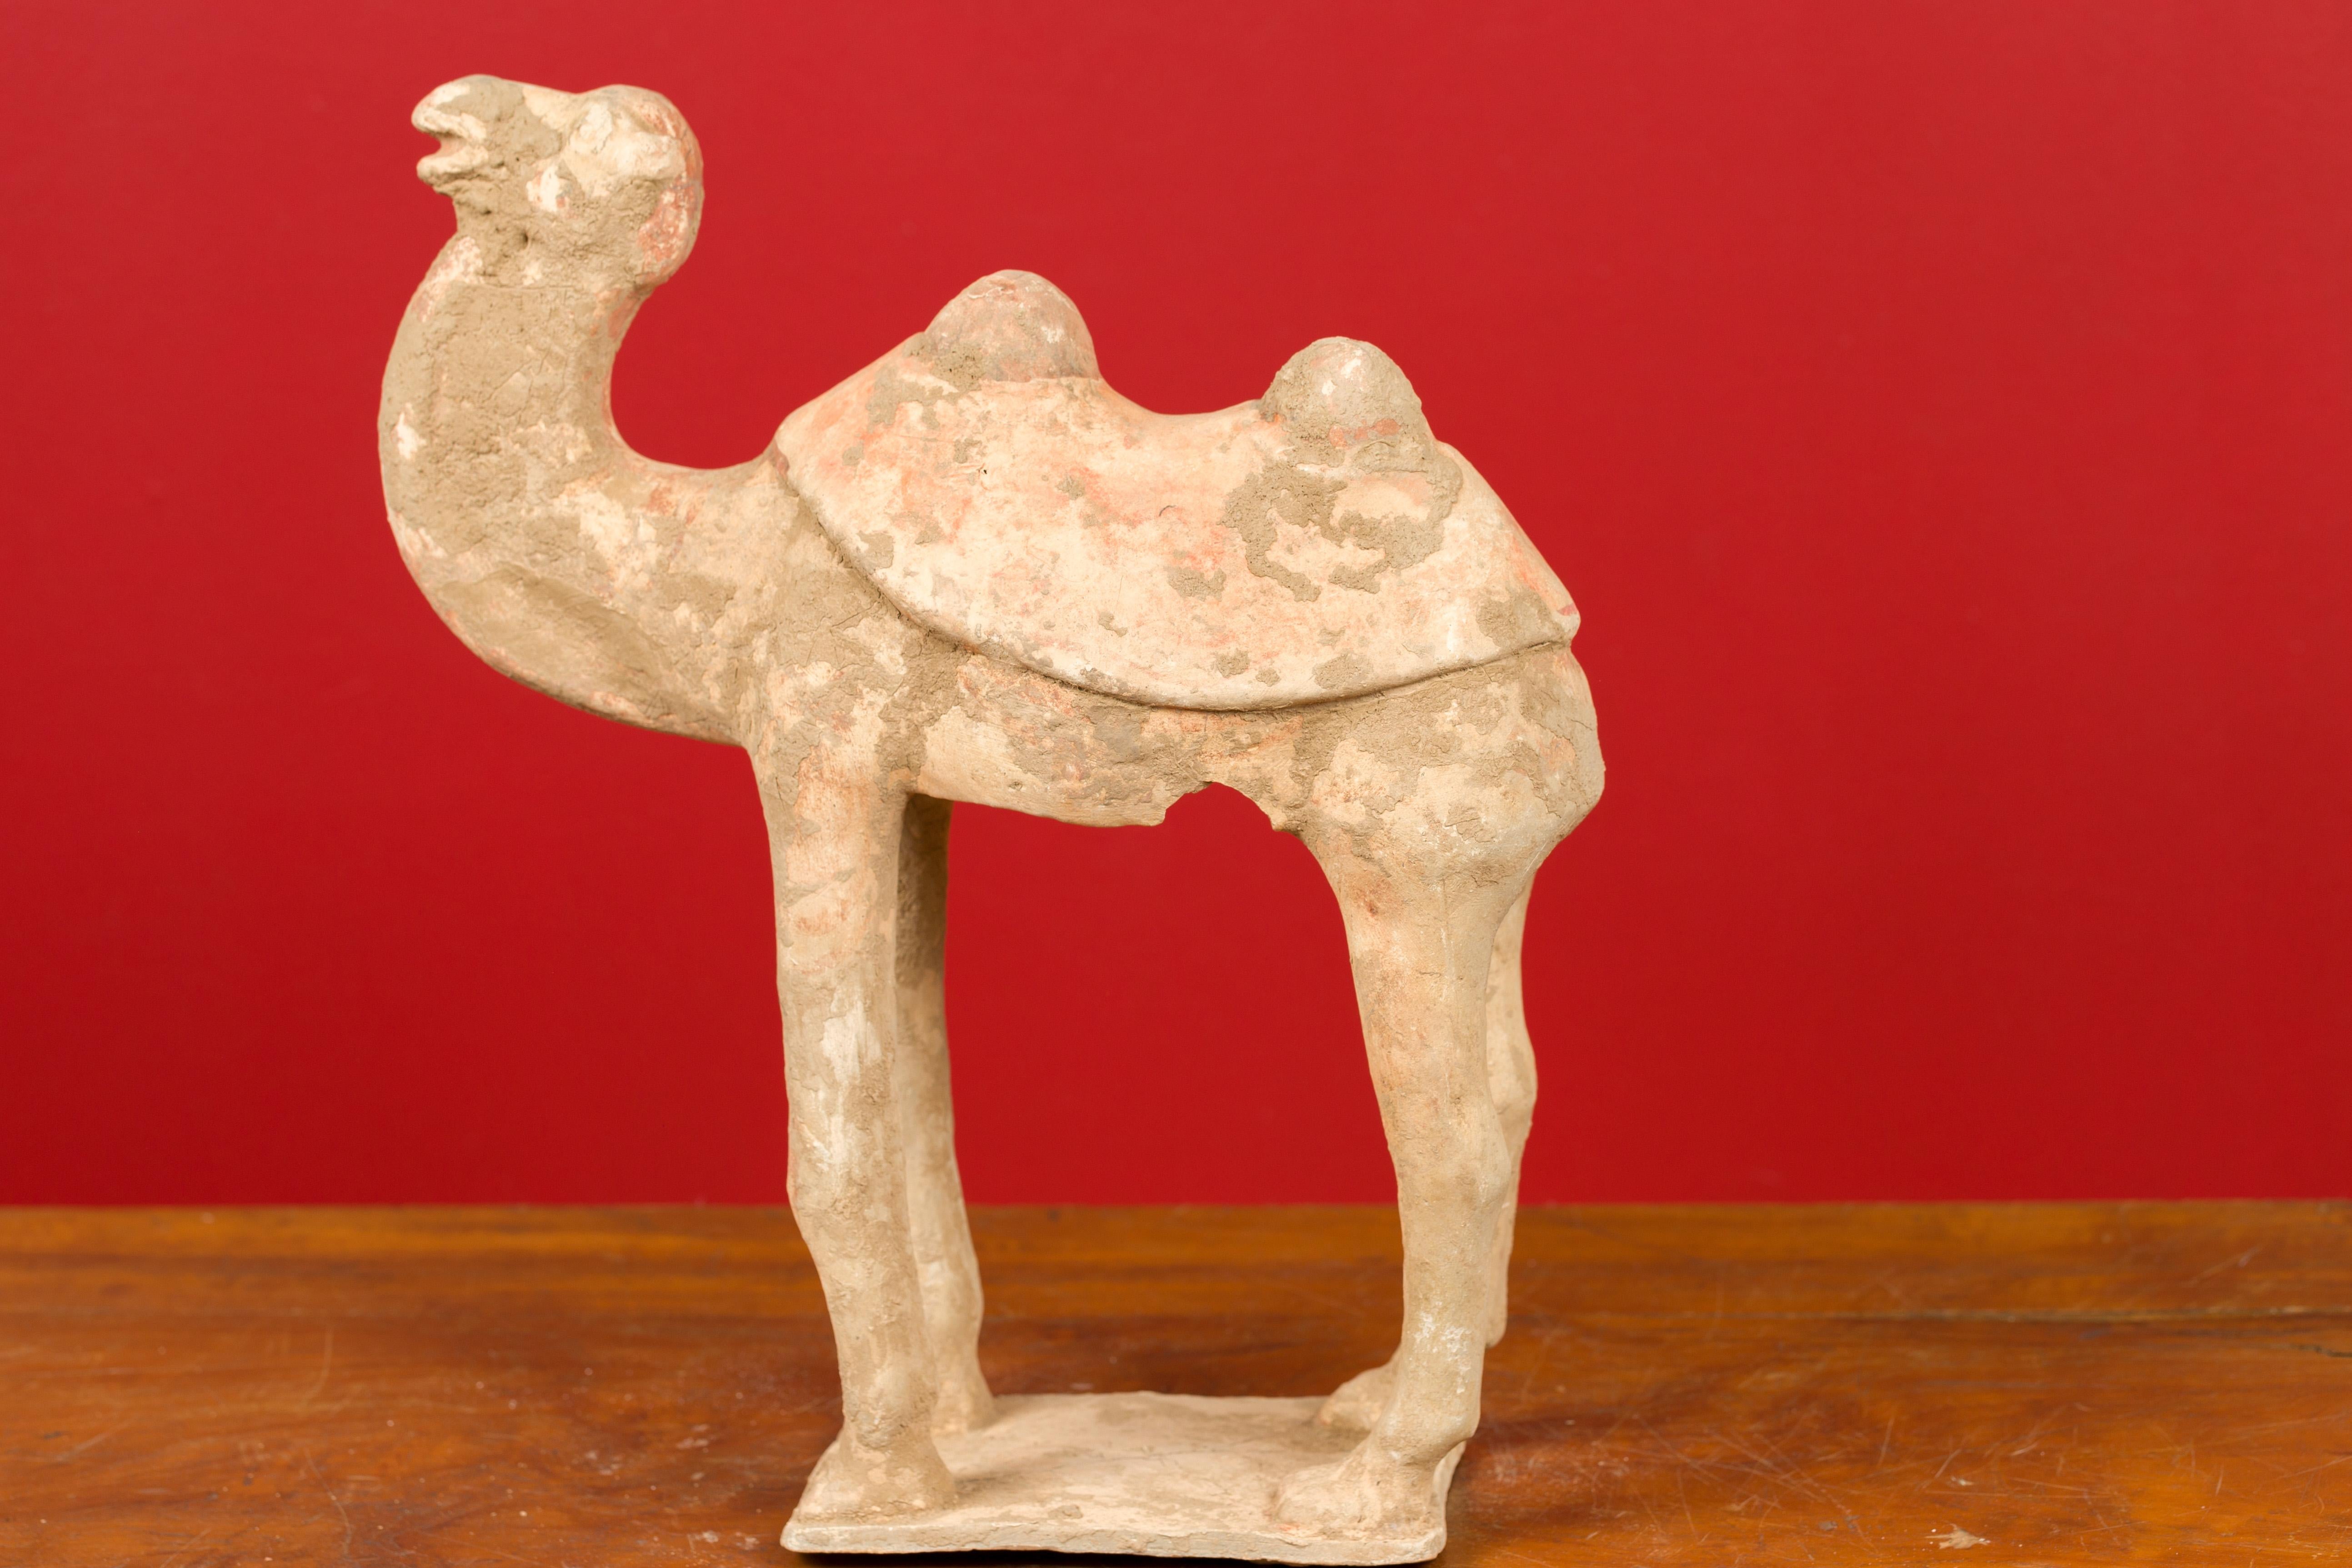 Chinese Han Dynasty 202 BC-200 AD Mingqi Camel with Original Orange Paint 4